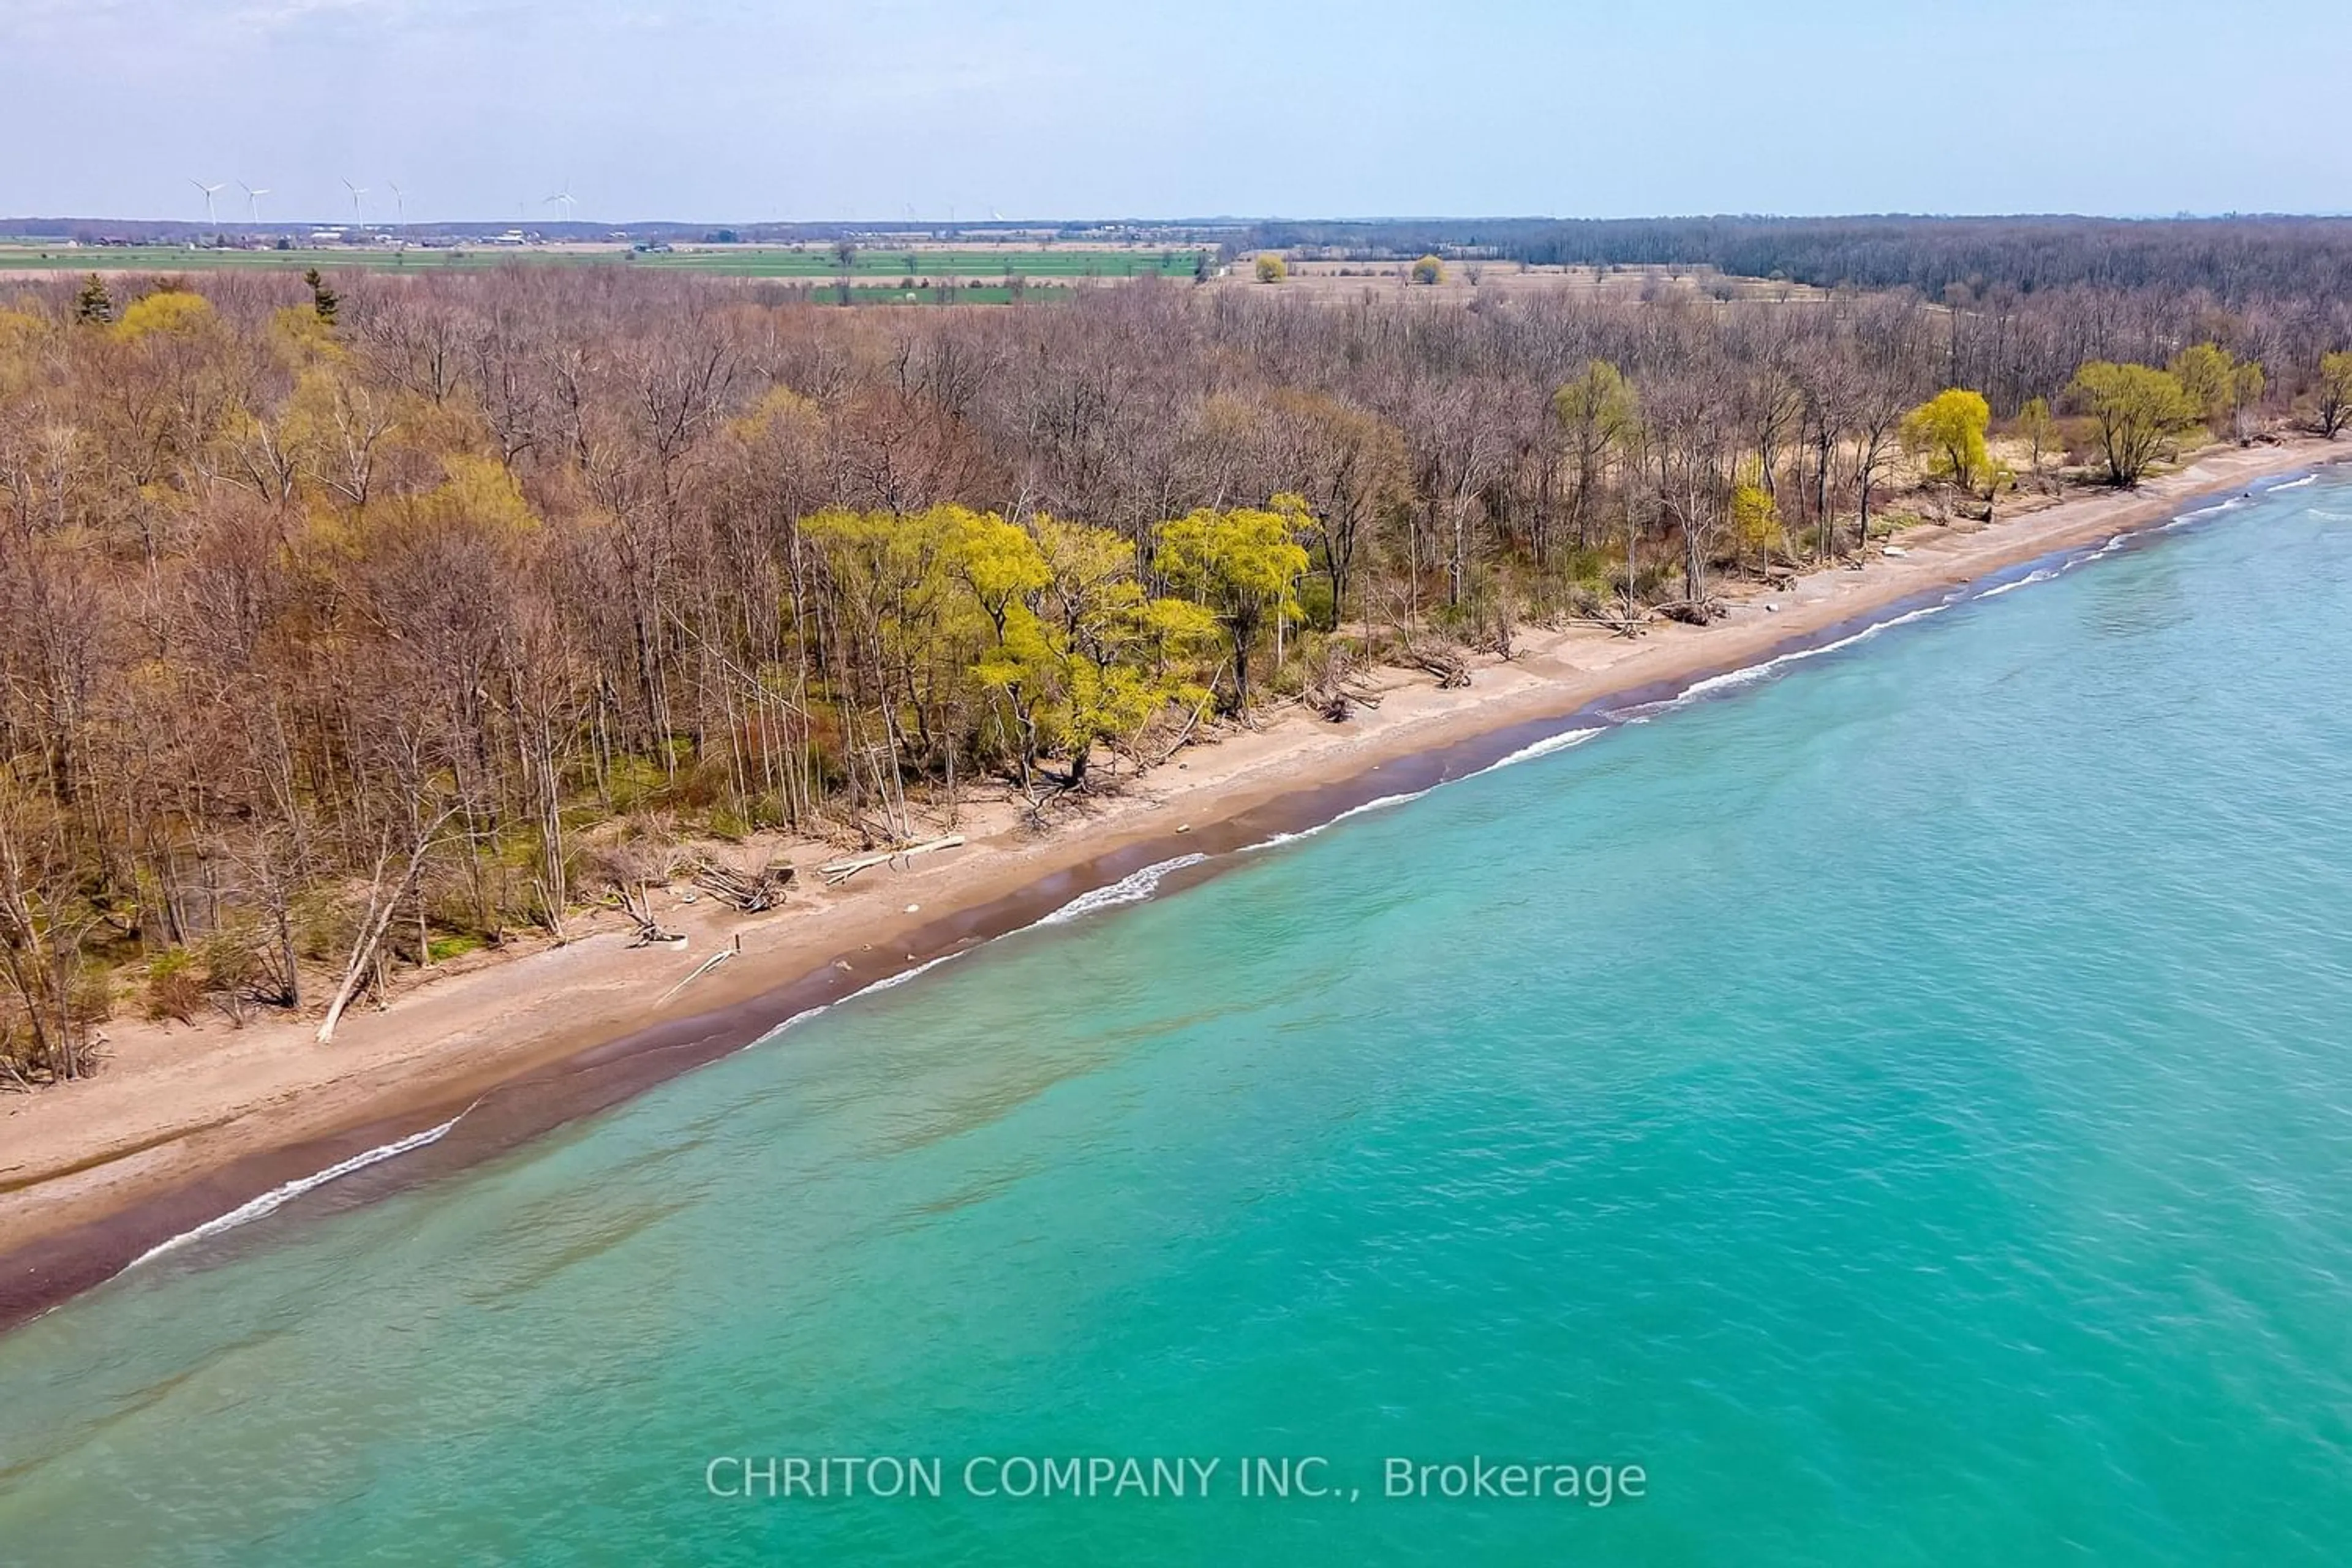 Lakeview for 50 Lakeview Line, Haldimand Ontario N1A 2W8